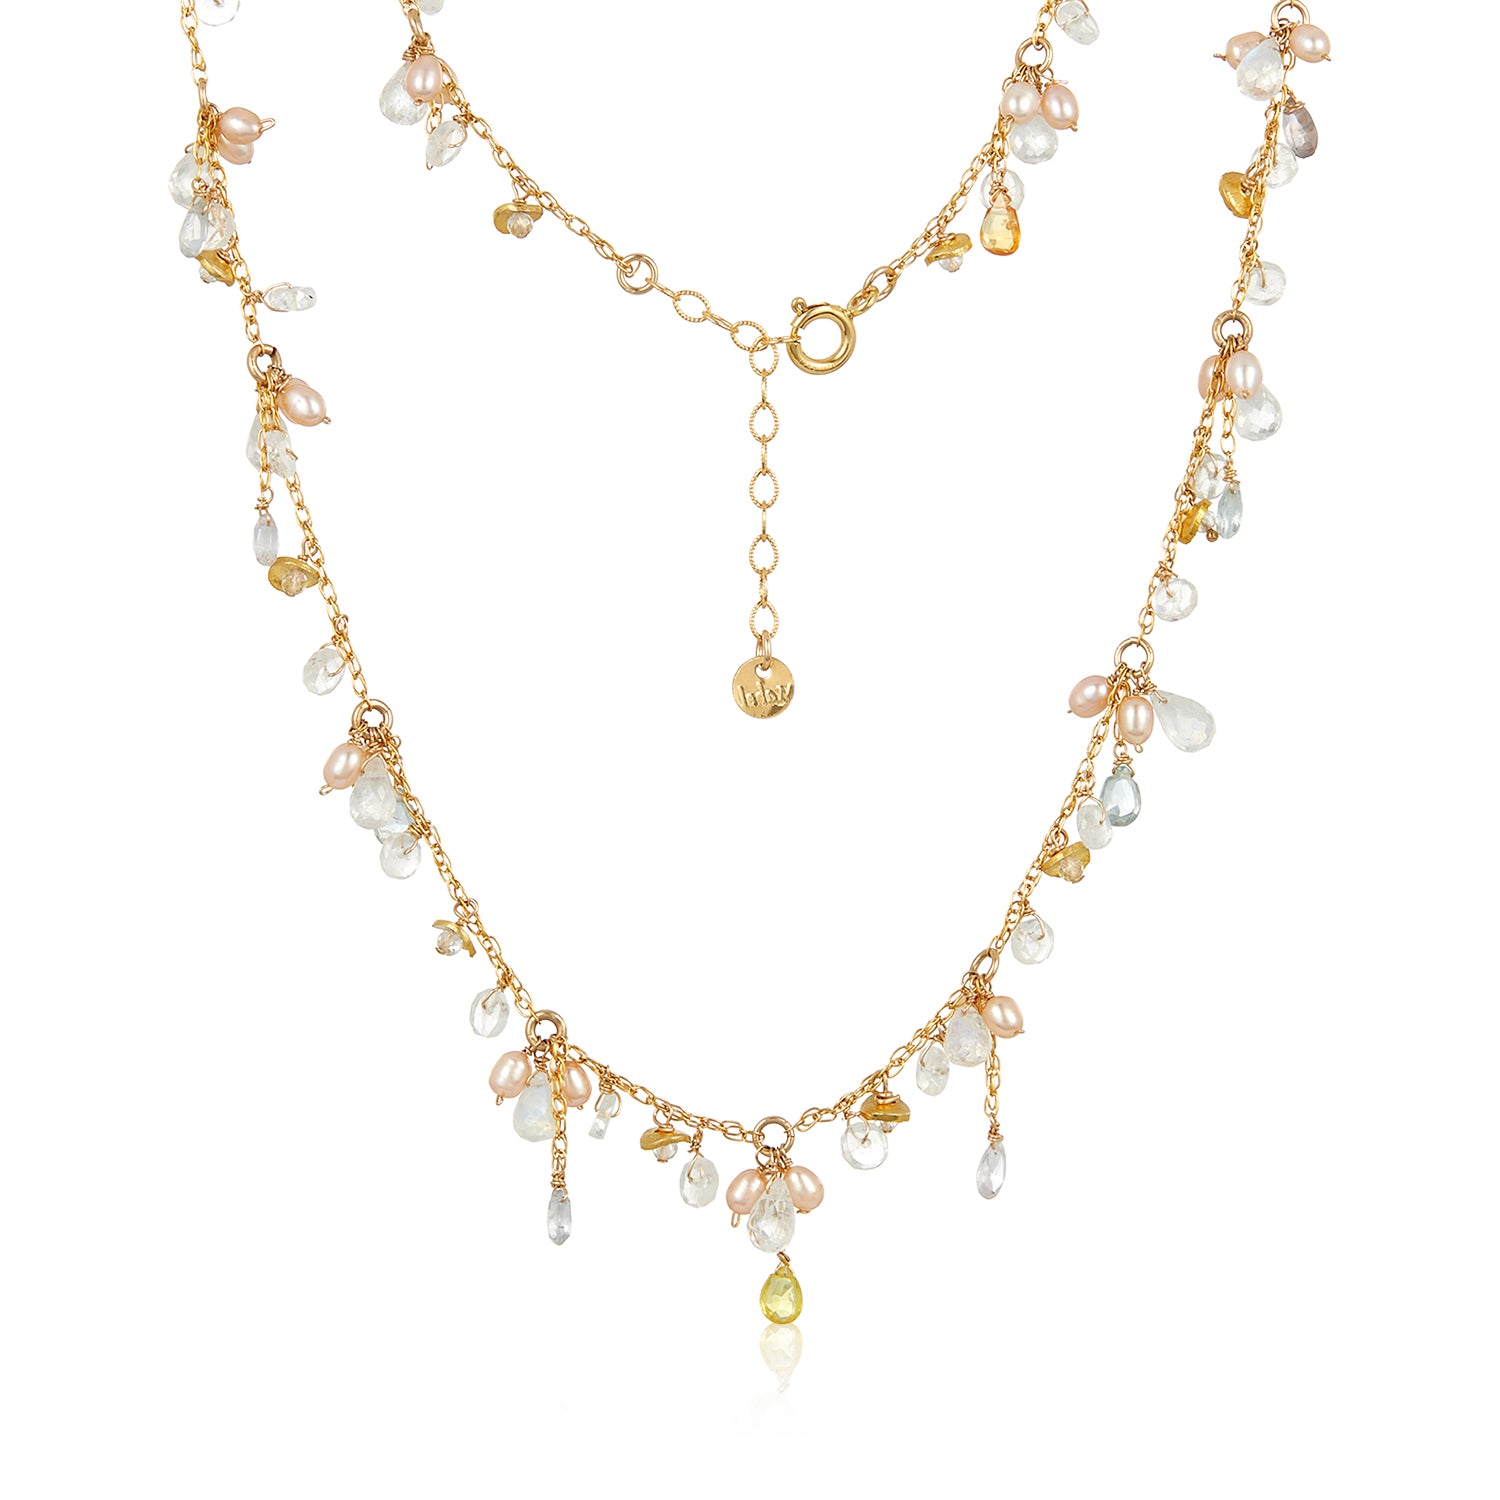 Moonstone Peachy Pearl Necklace